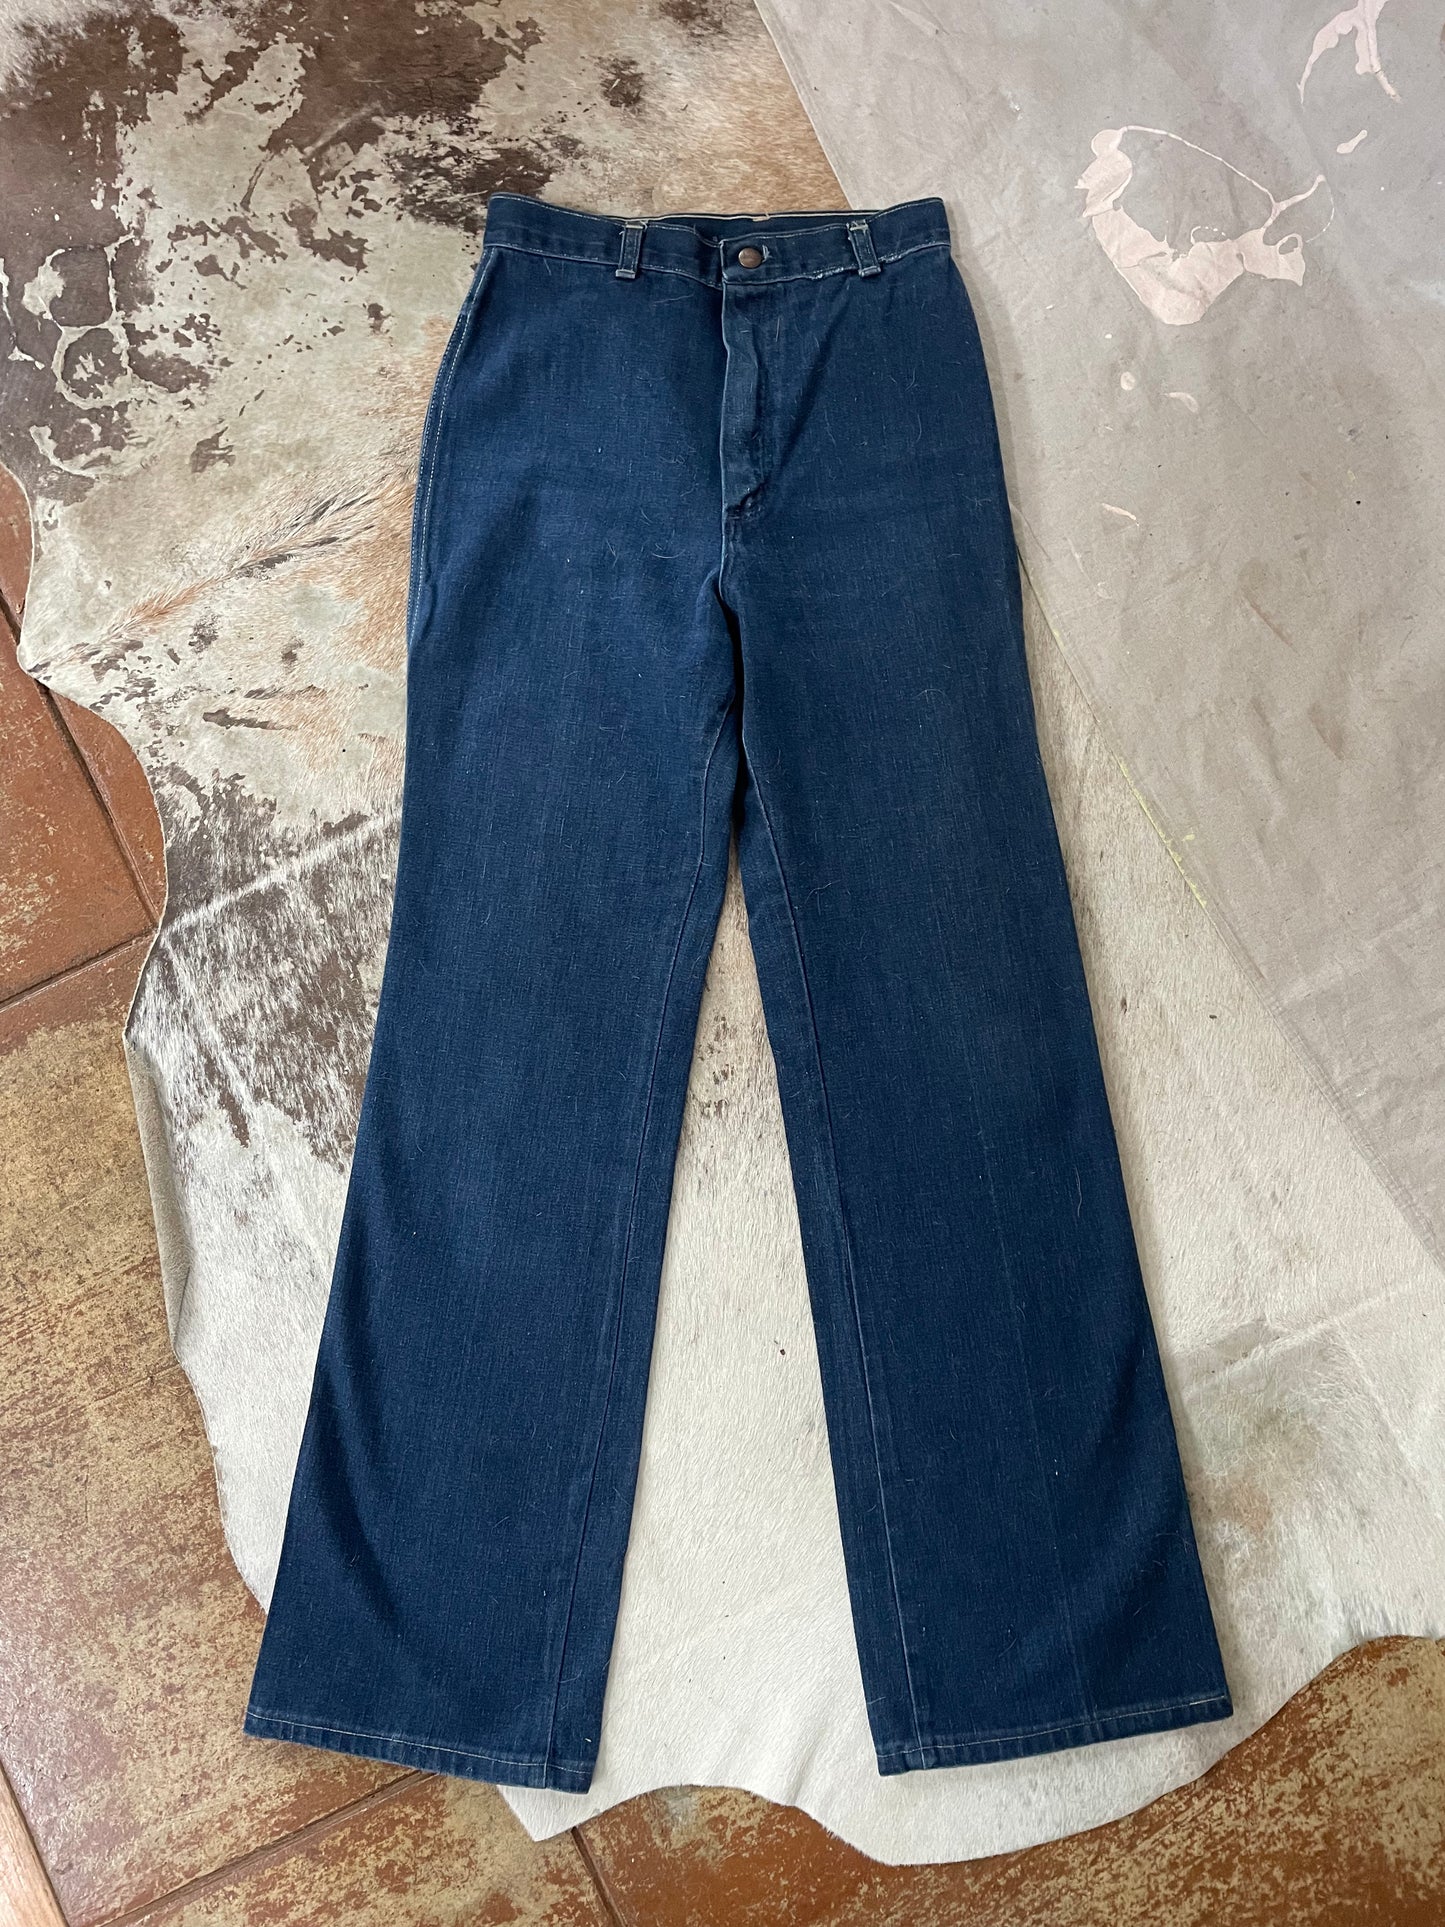 70s Wrangler Rope Embroidered Jeans